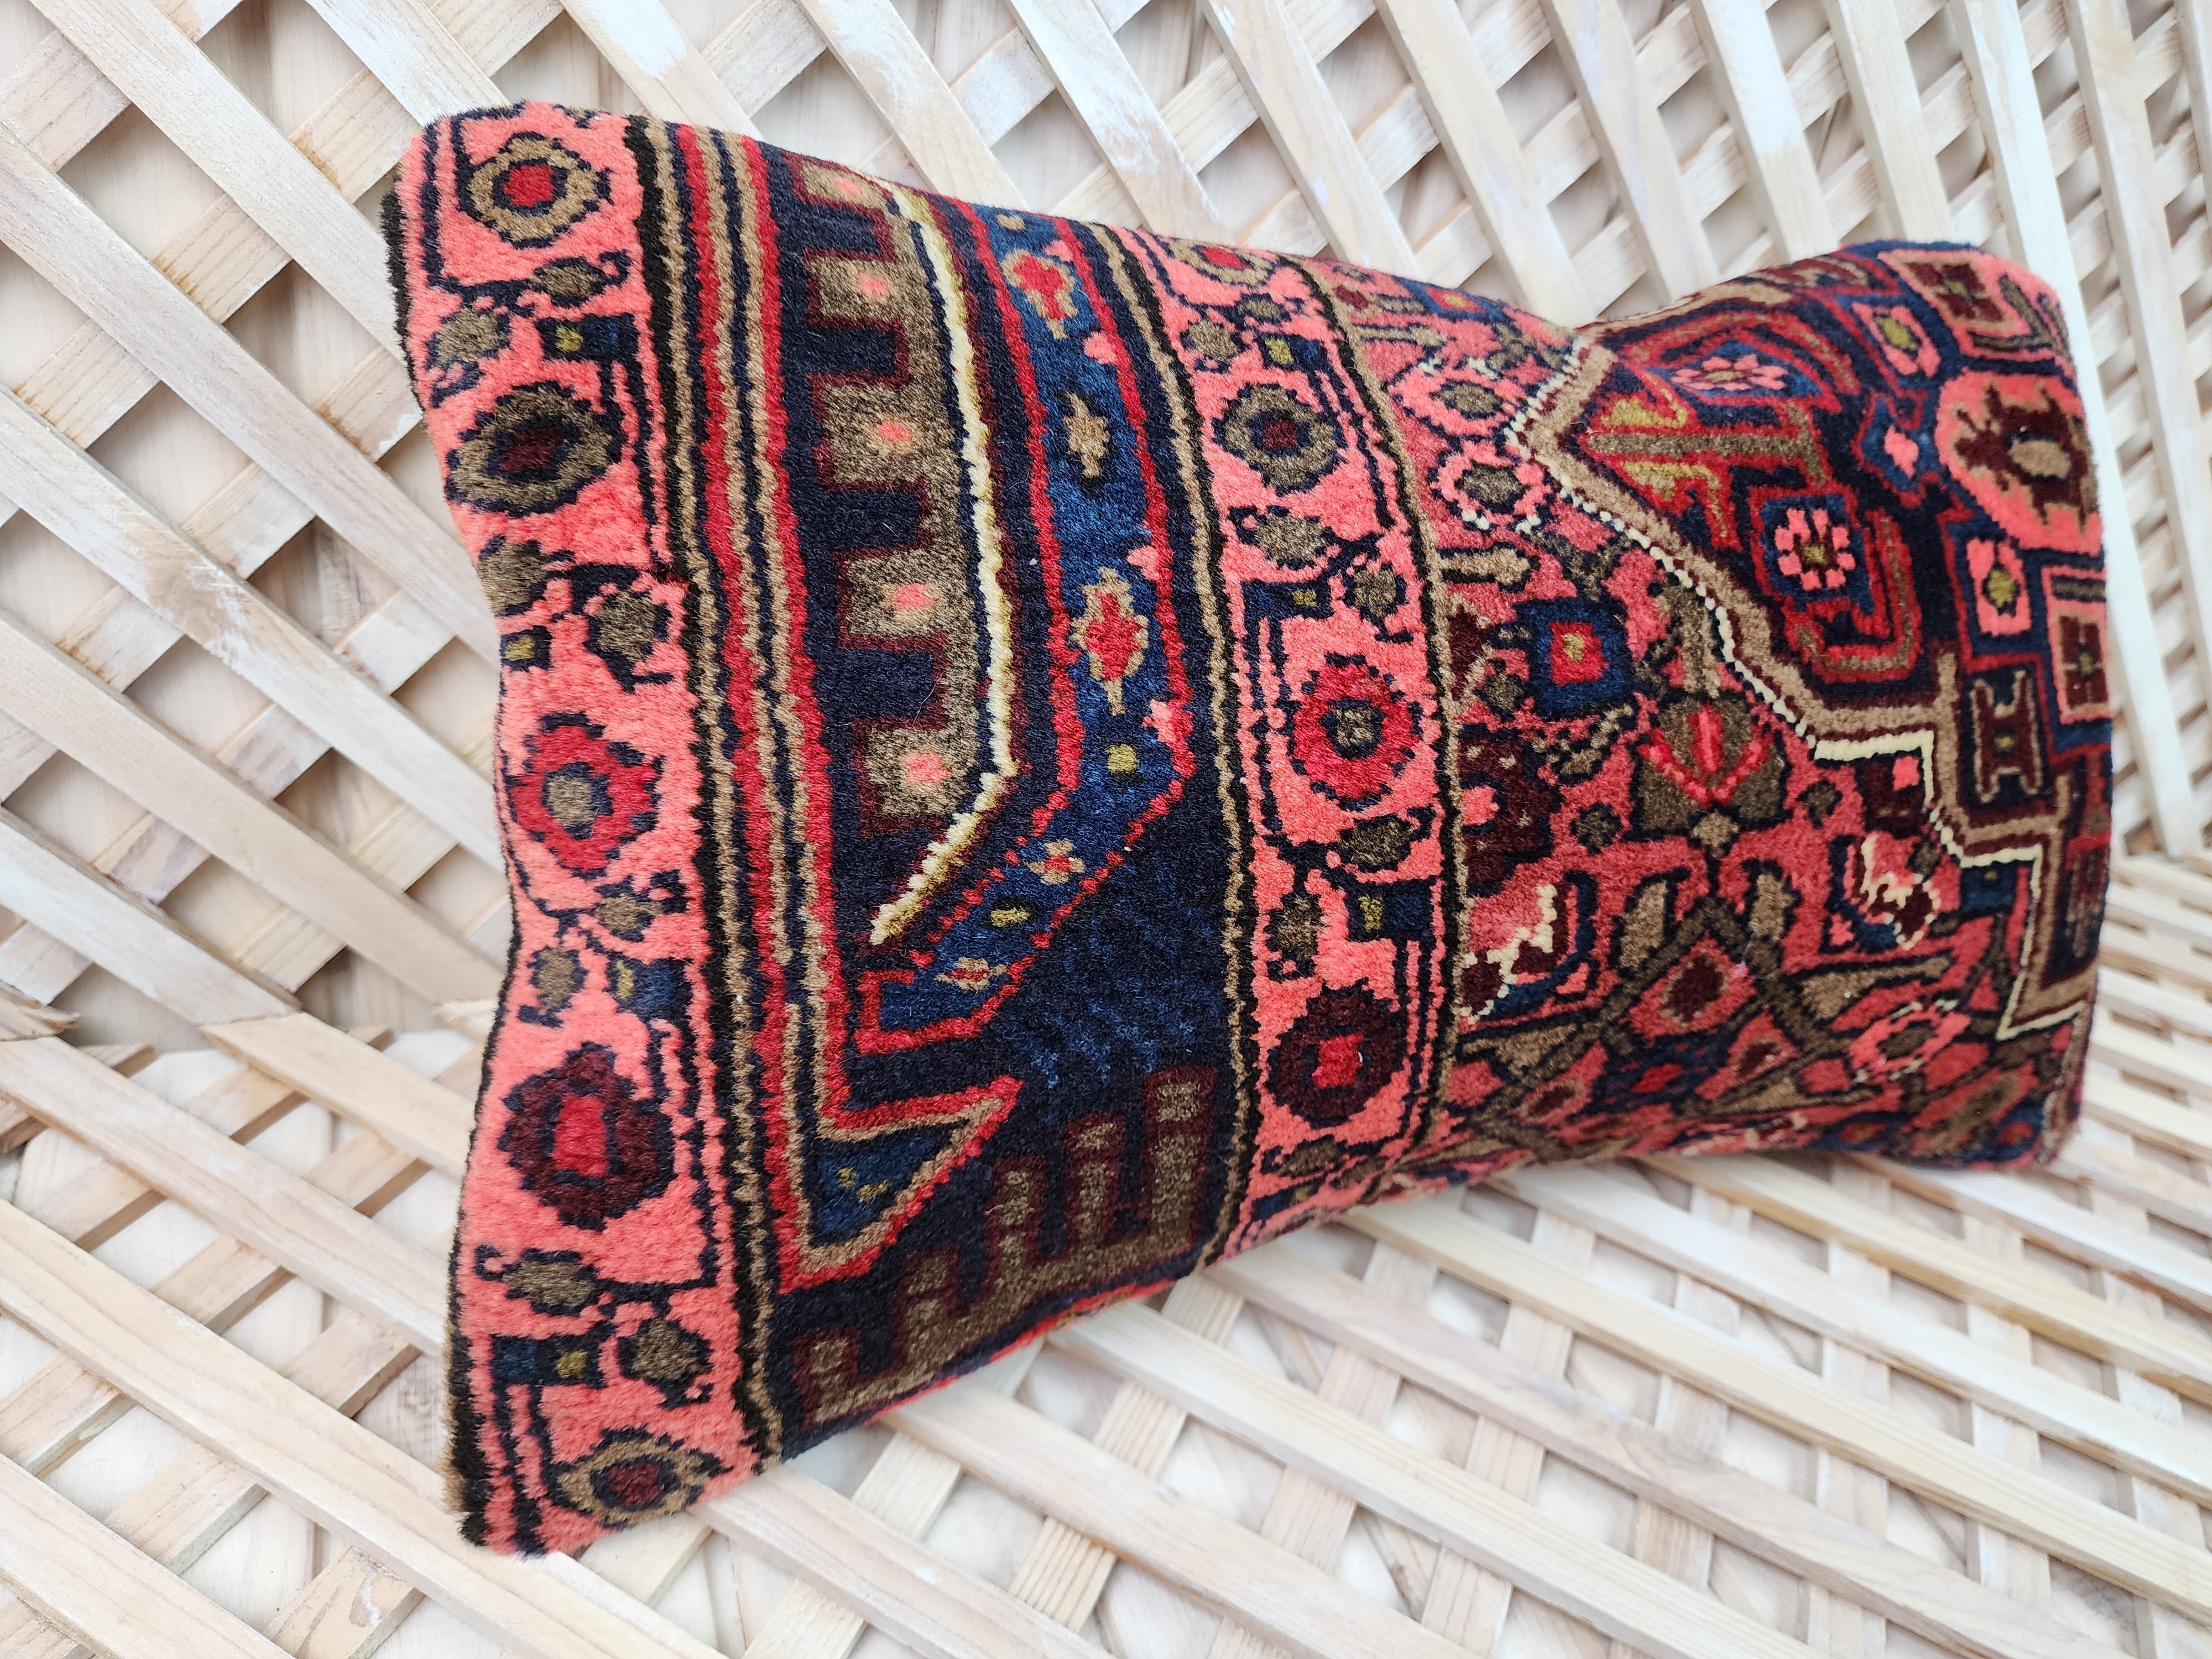 Vintage Persian Carpet Pillow Cover 12x20 inch